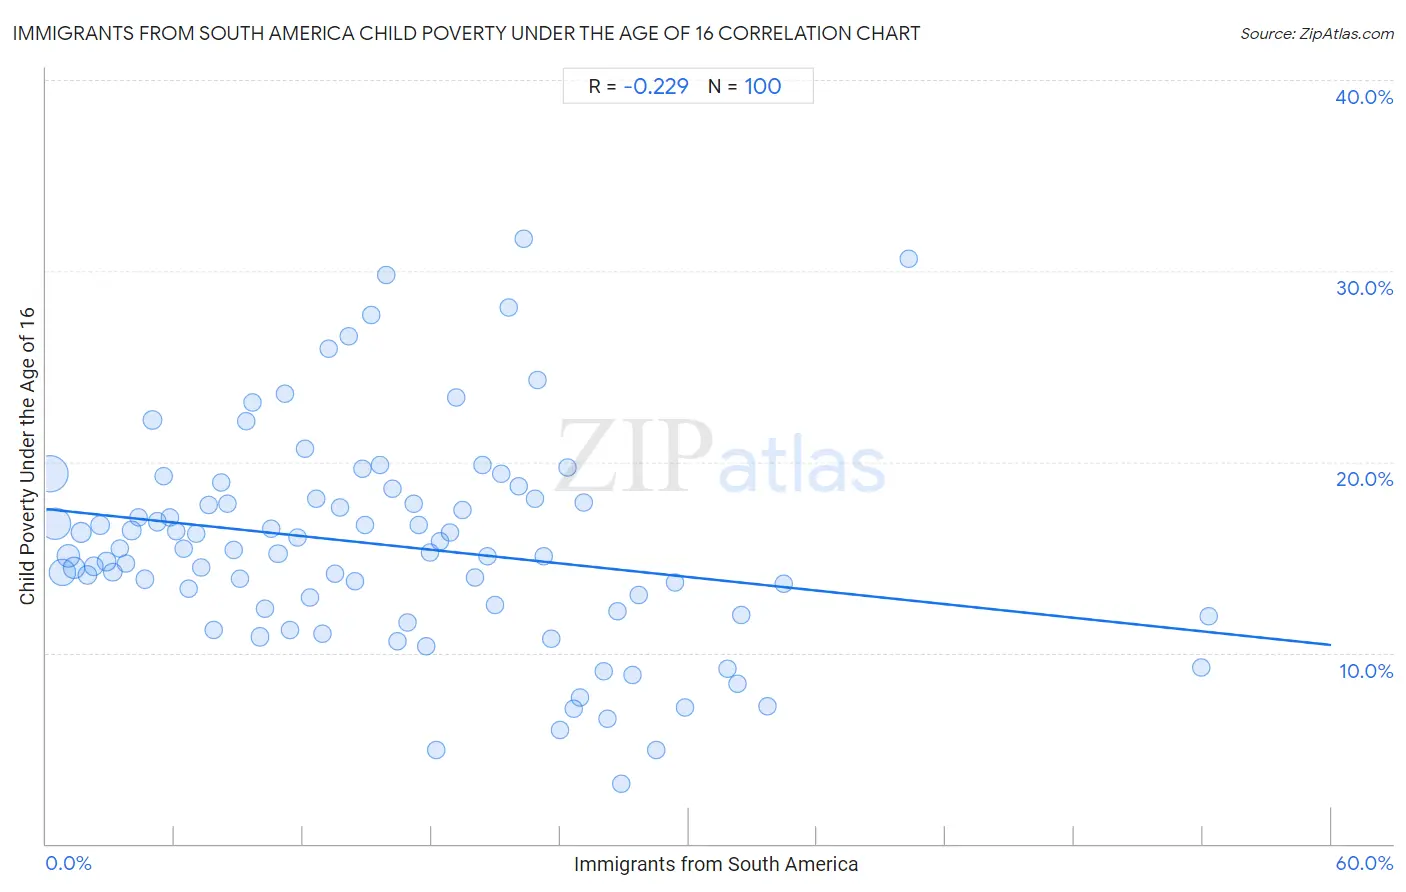 Immigrants from South America Child Poverty Under the Age of 16